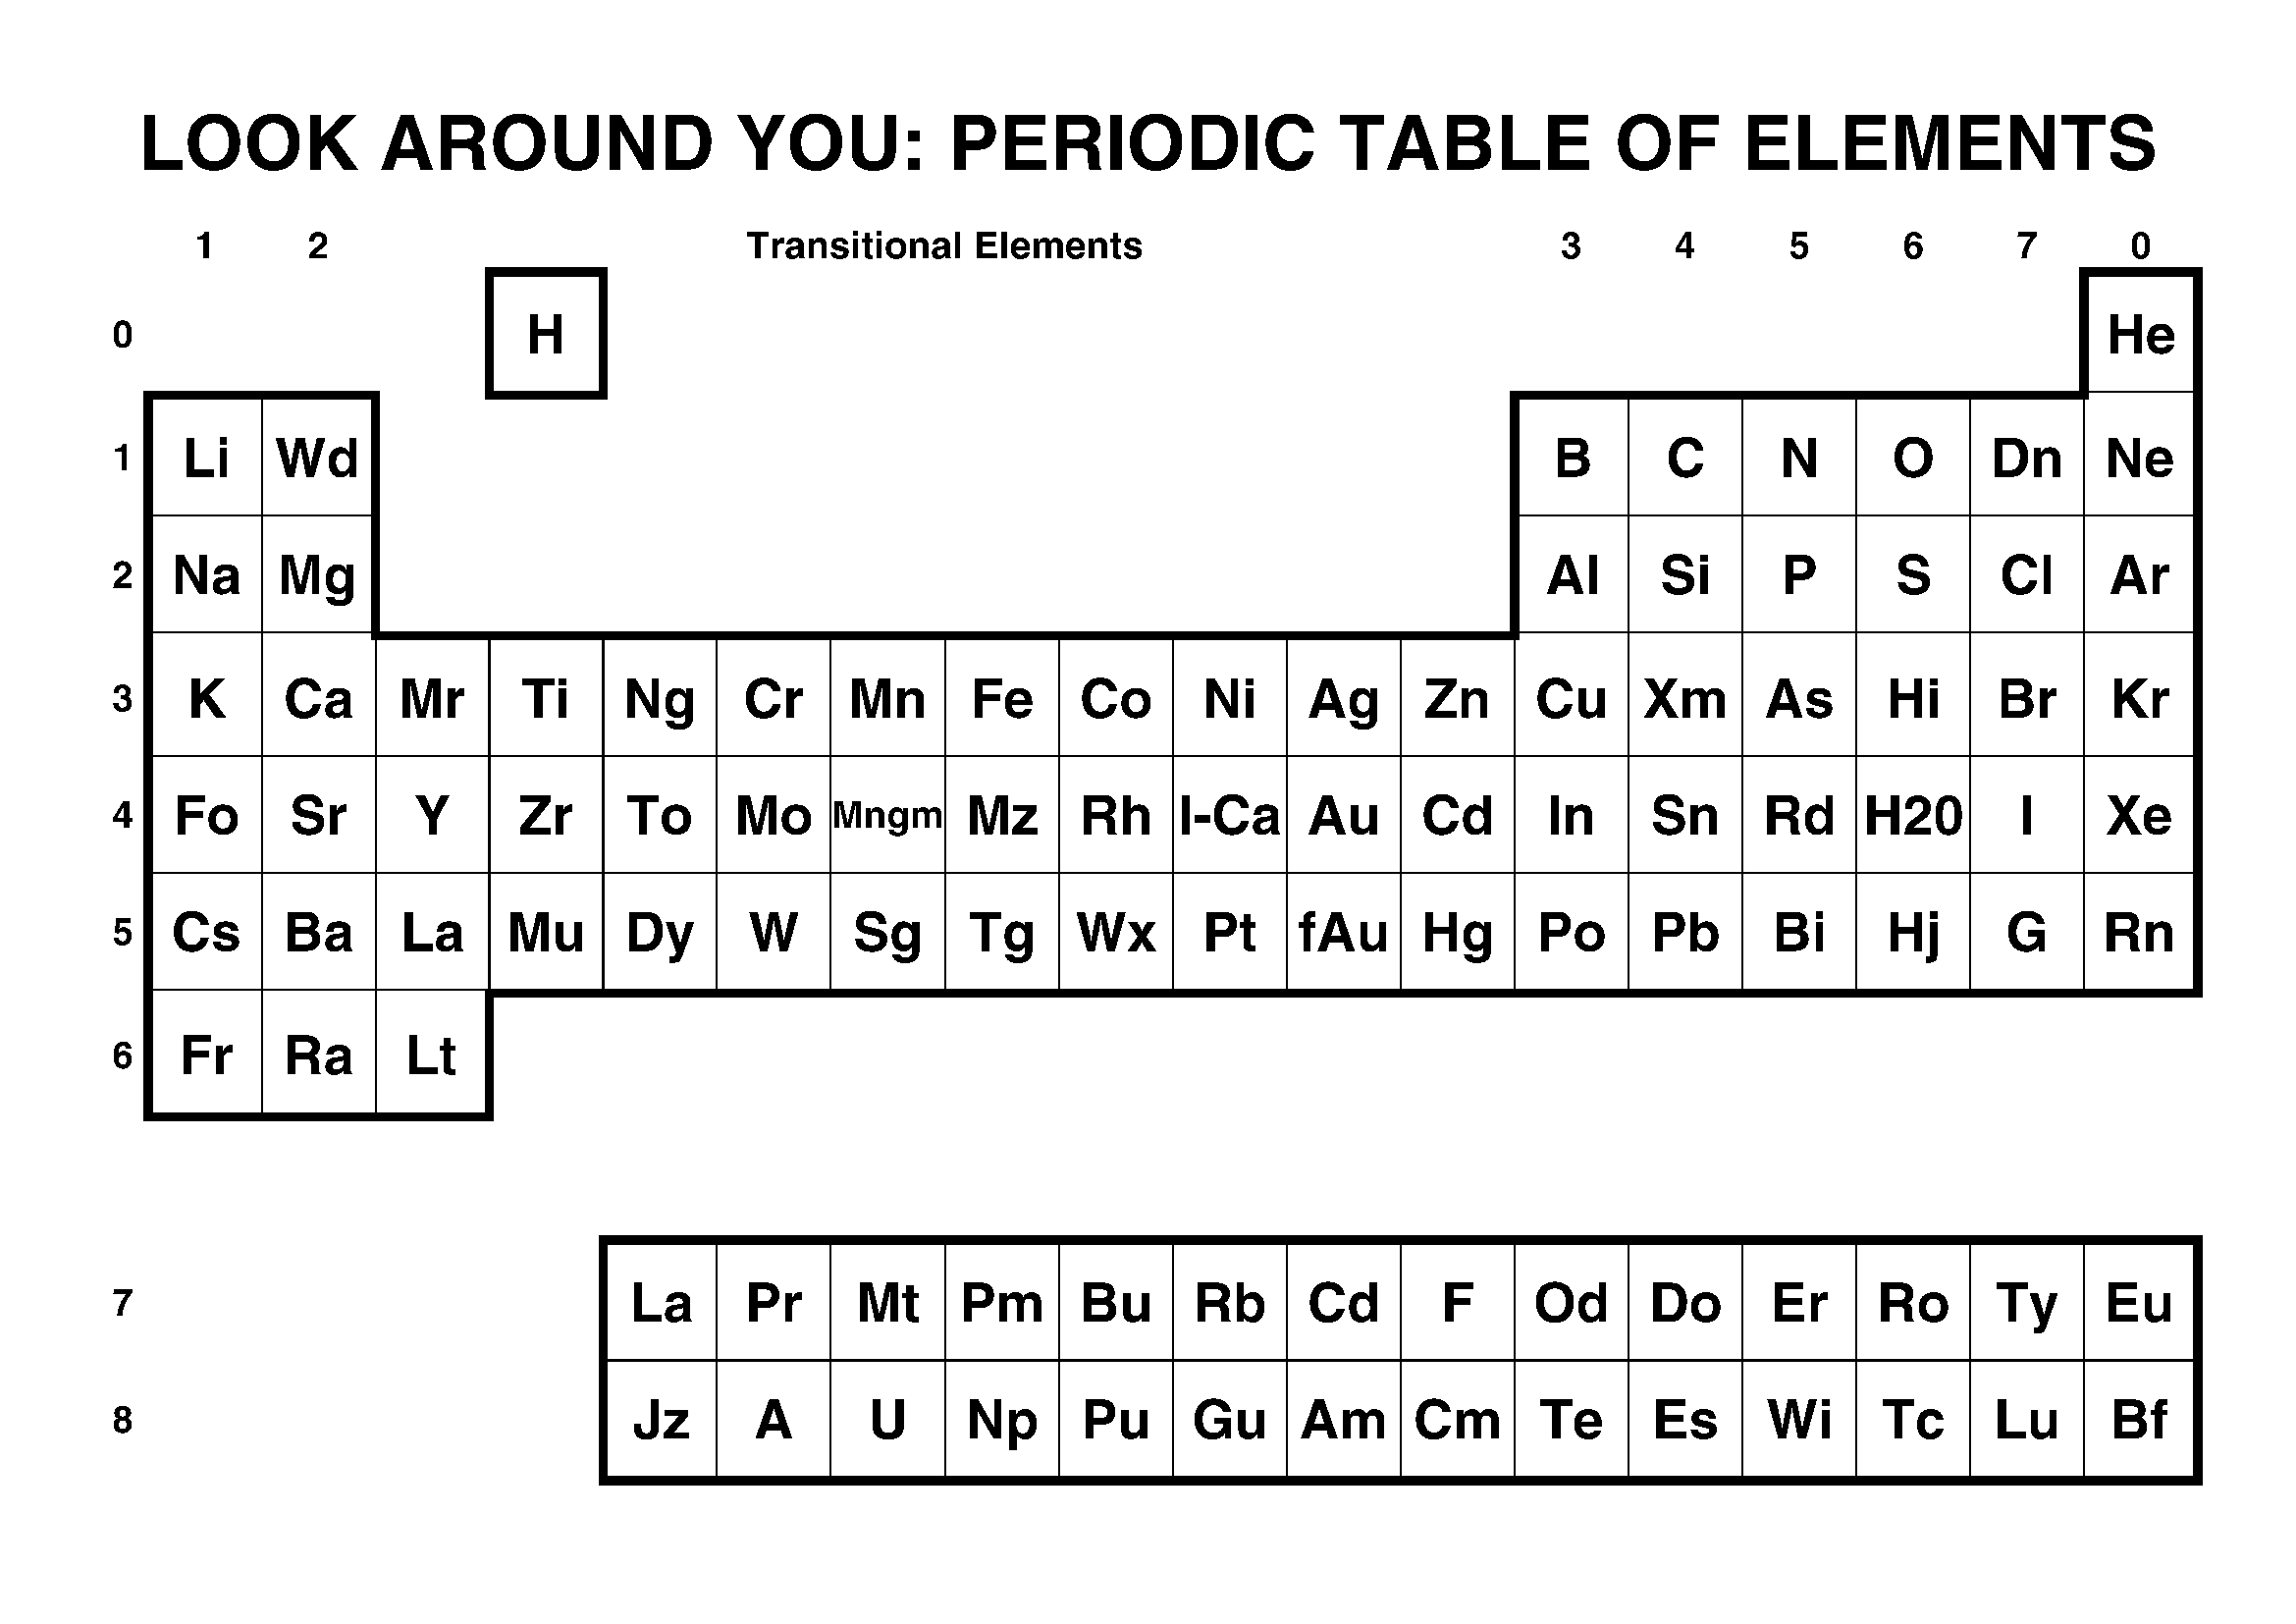 List of chemical symbols - Look Around You Wiki